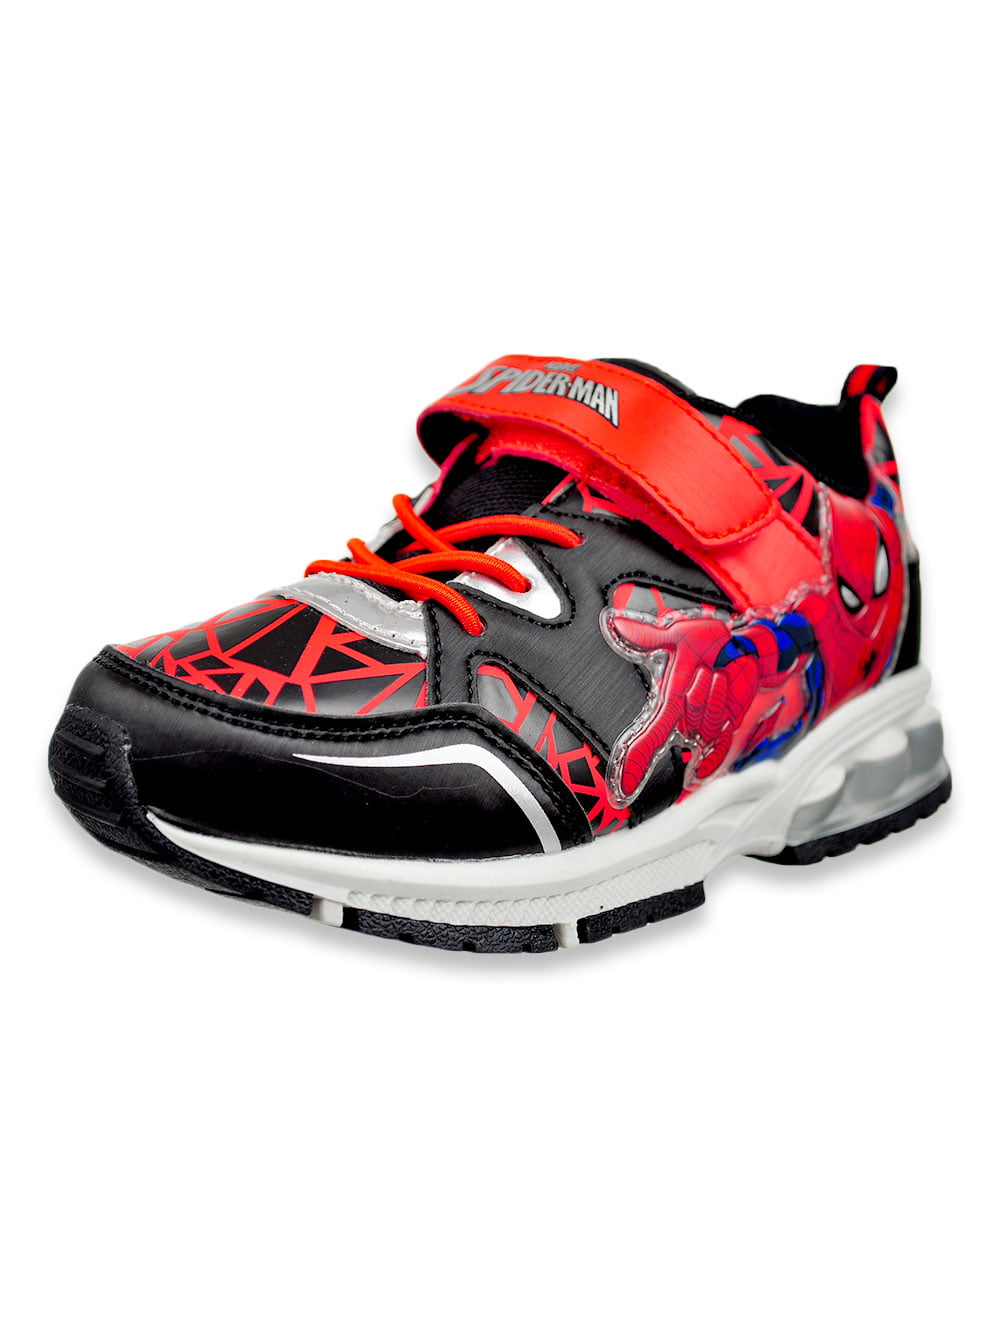 FAVORITE CHARACTERS BOY'S SPIDER-MAN OSPF380 LIGHTED ATHLETIC SNEAKER